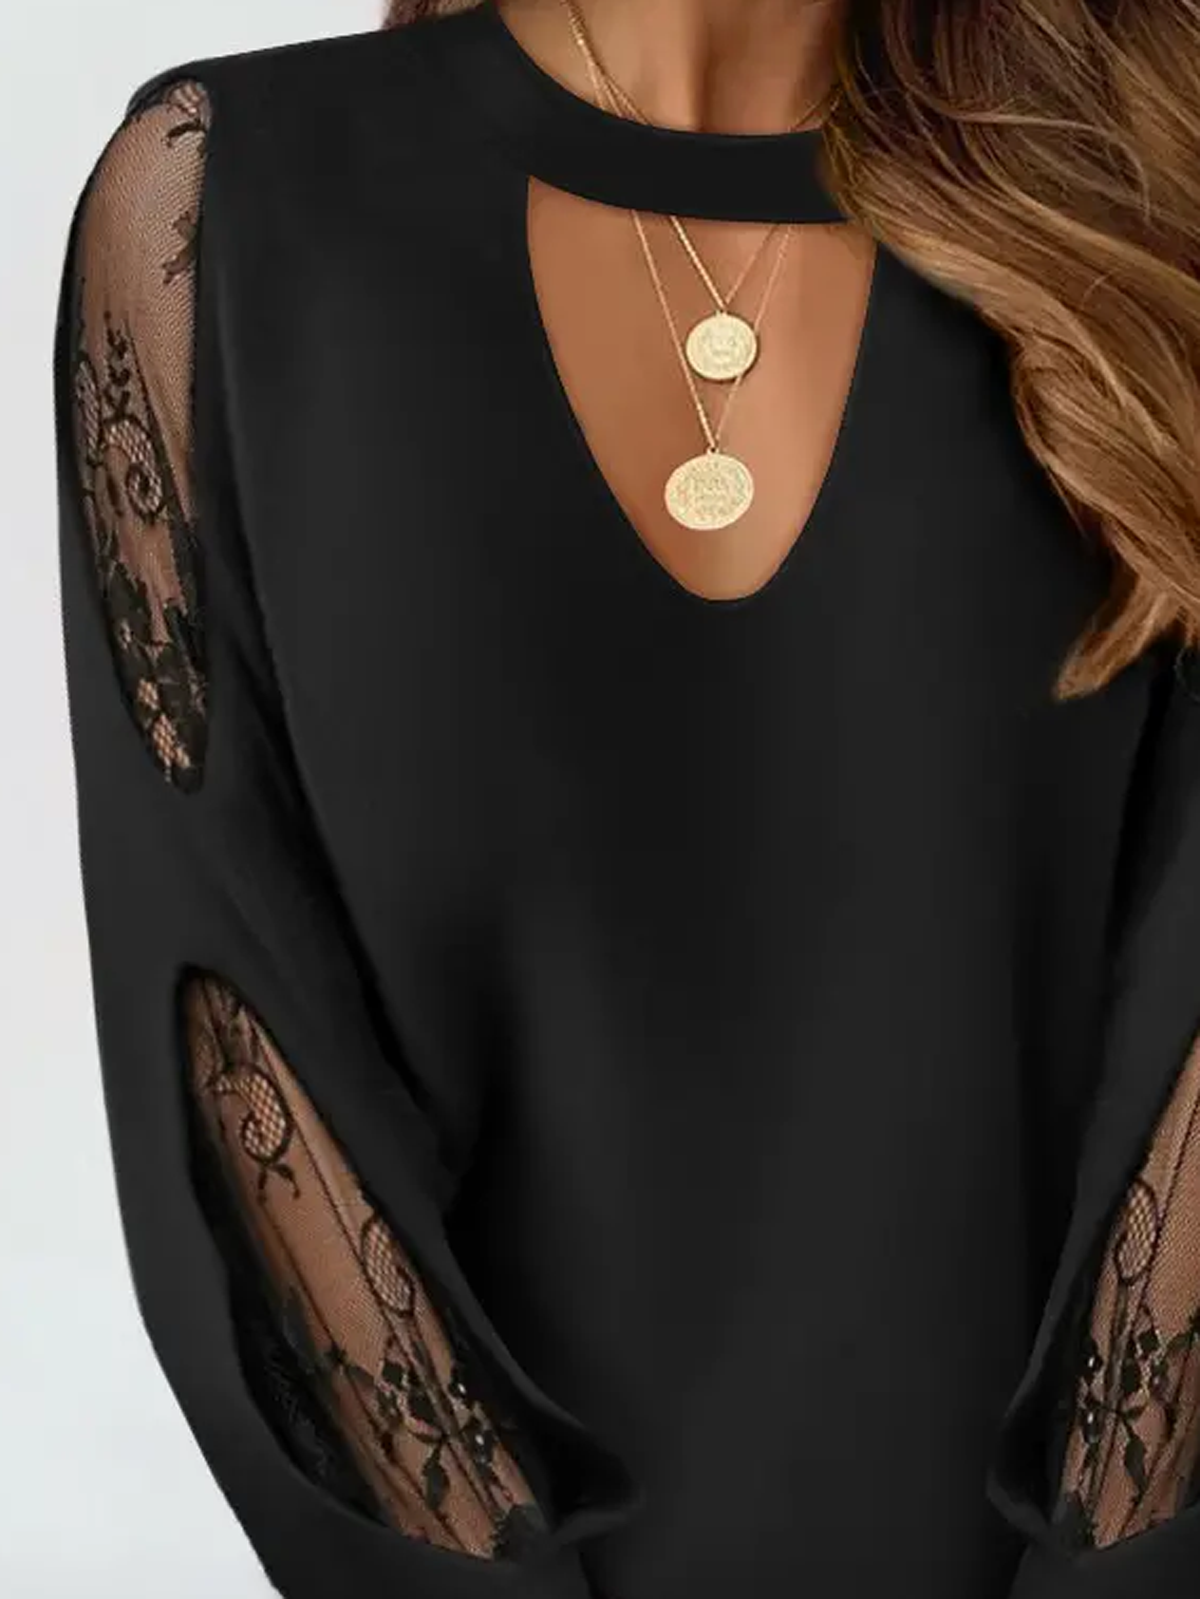 Notched Long Sleeve Plain Lace Regular Micro-Elasticity Loose Shirt For Women